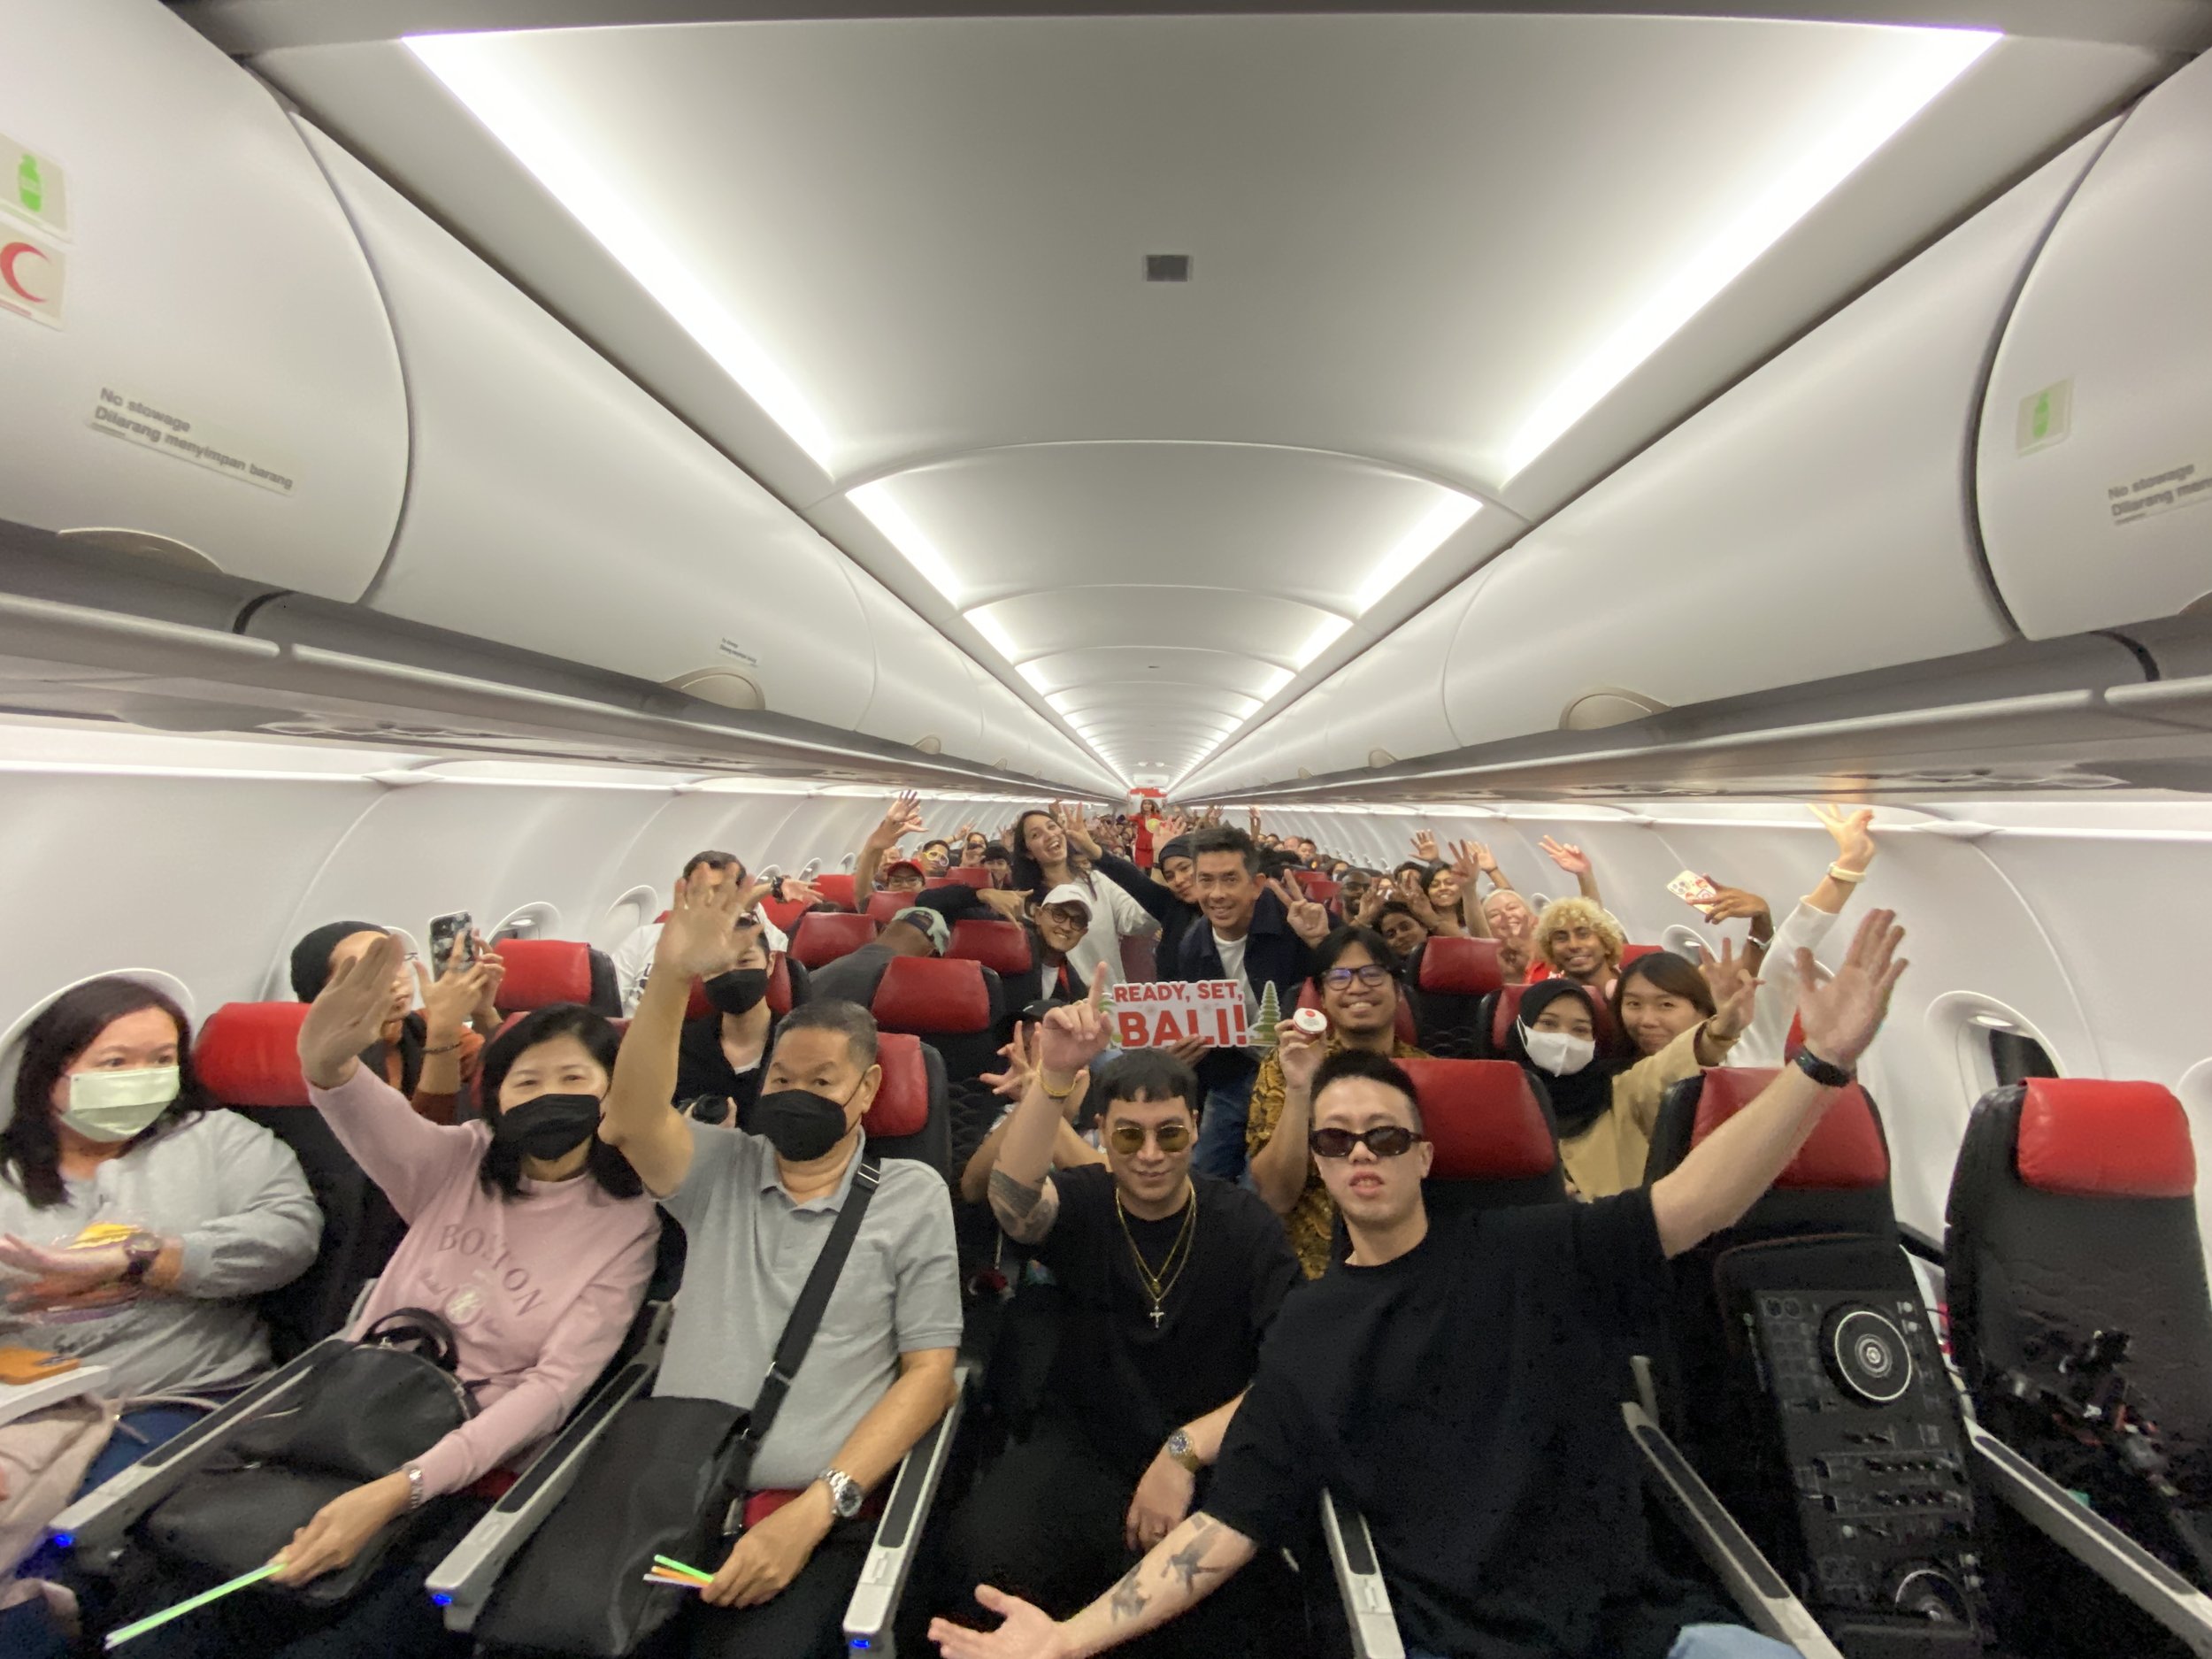   A historical flight: Thrilled guests, AirAsia Allstars and our men of the hour - BATE &amp; Airliftz - were onboard flight AK378 from Kuala Lumpur to Bali for AirAsia’s first ‘Party In The Air’.  